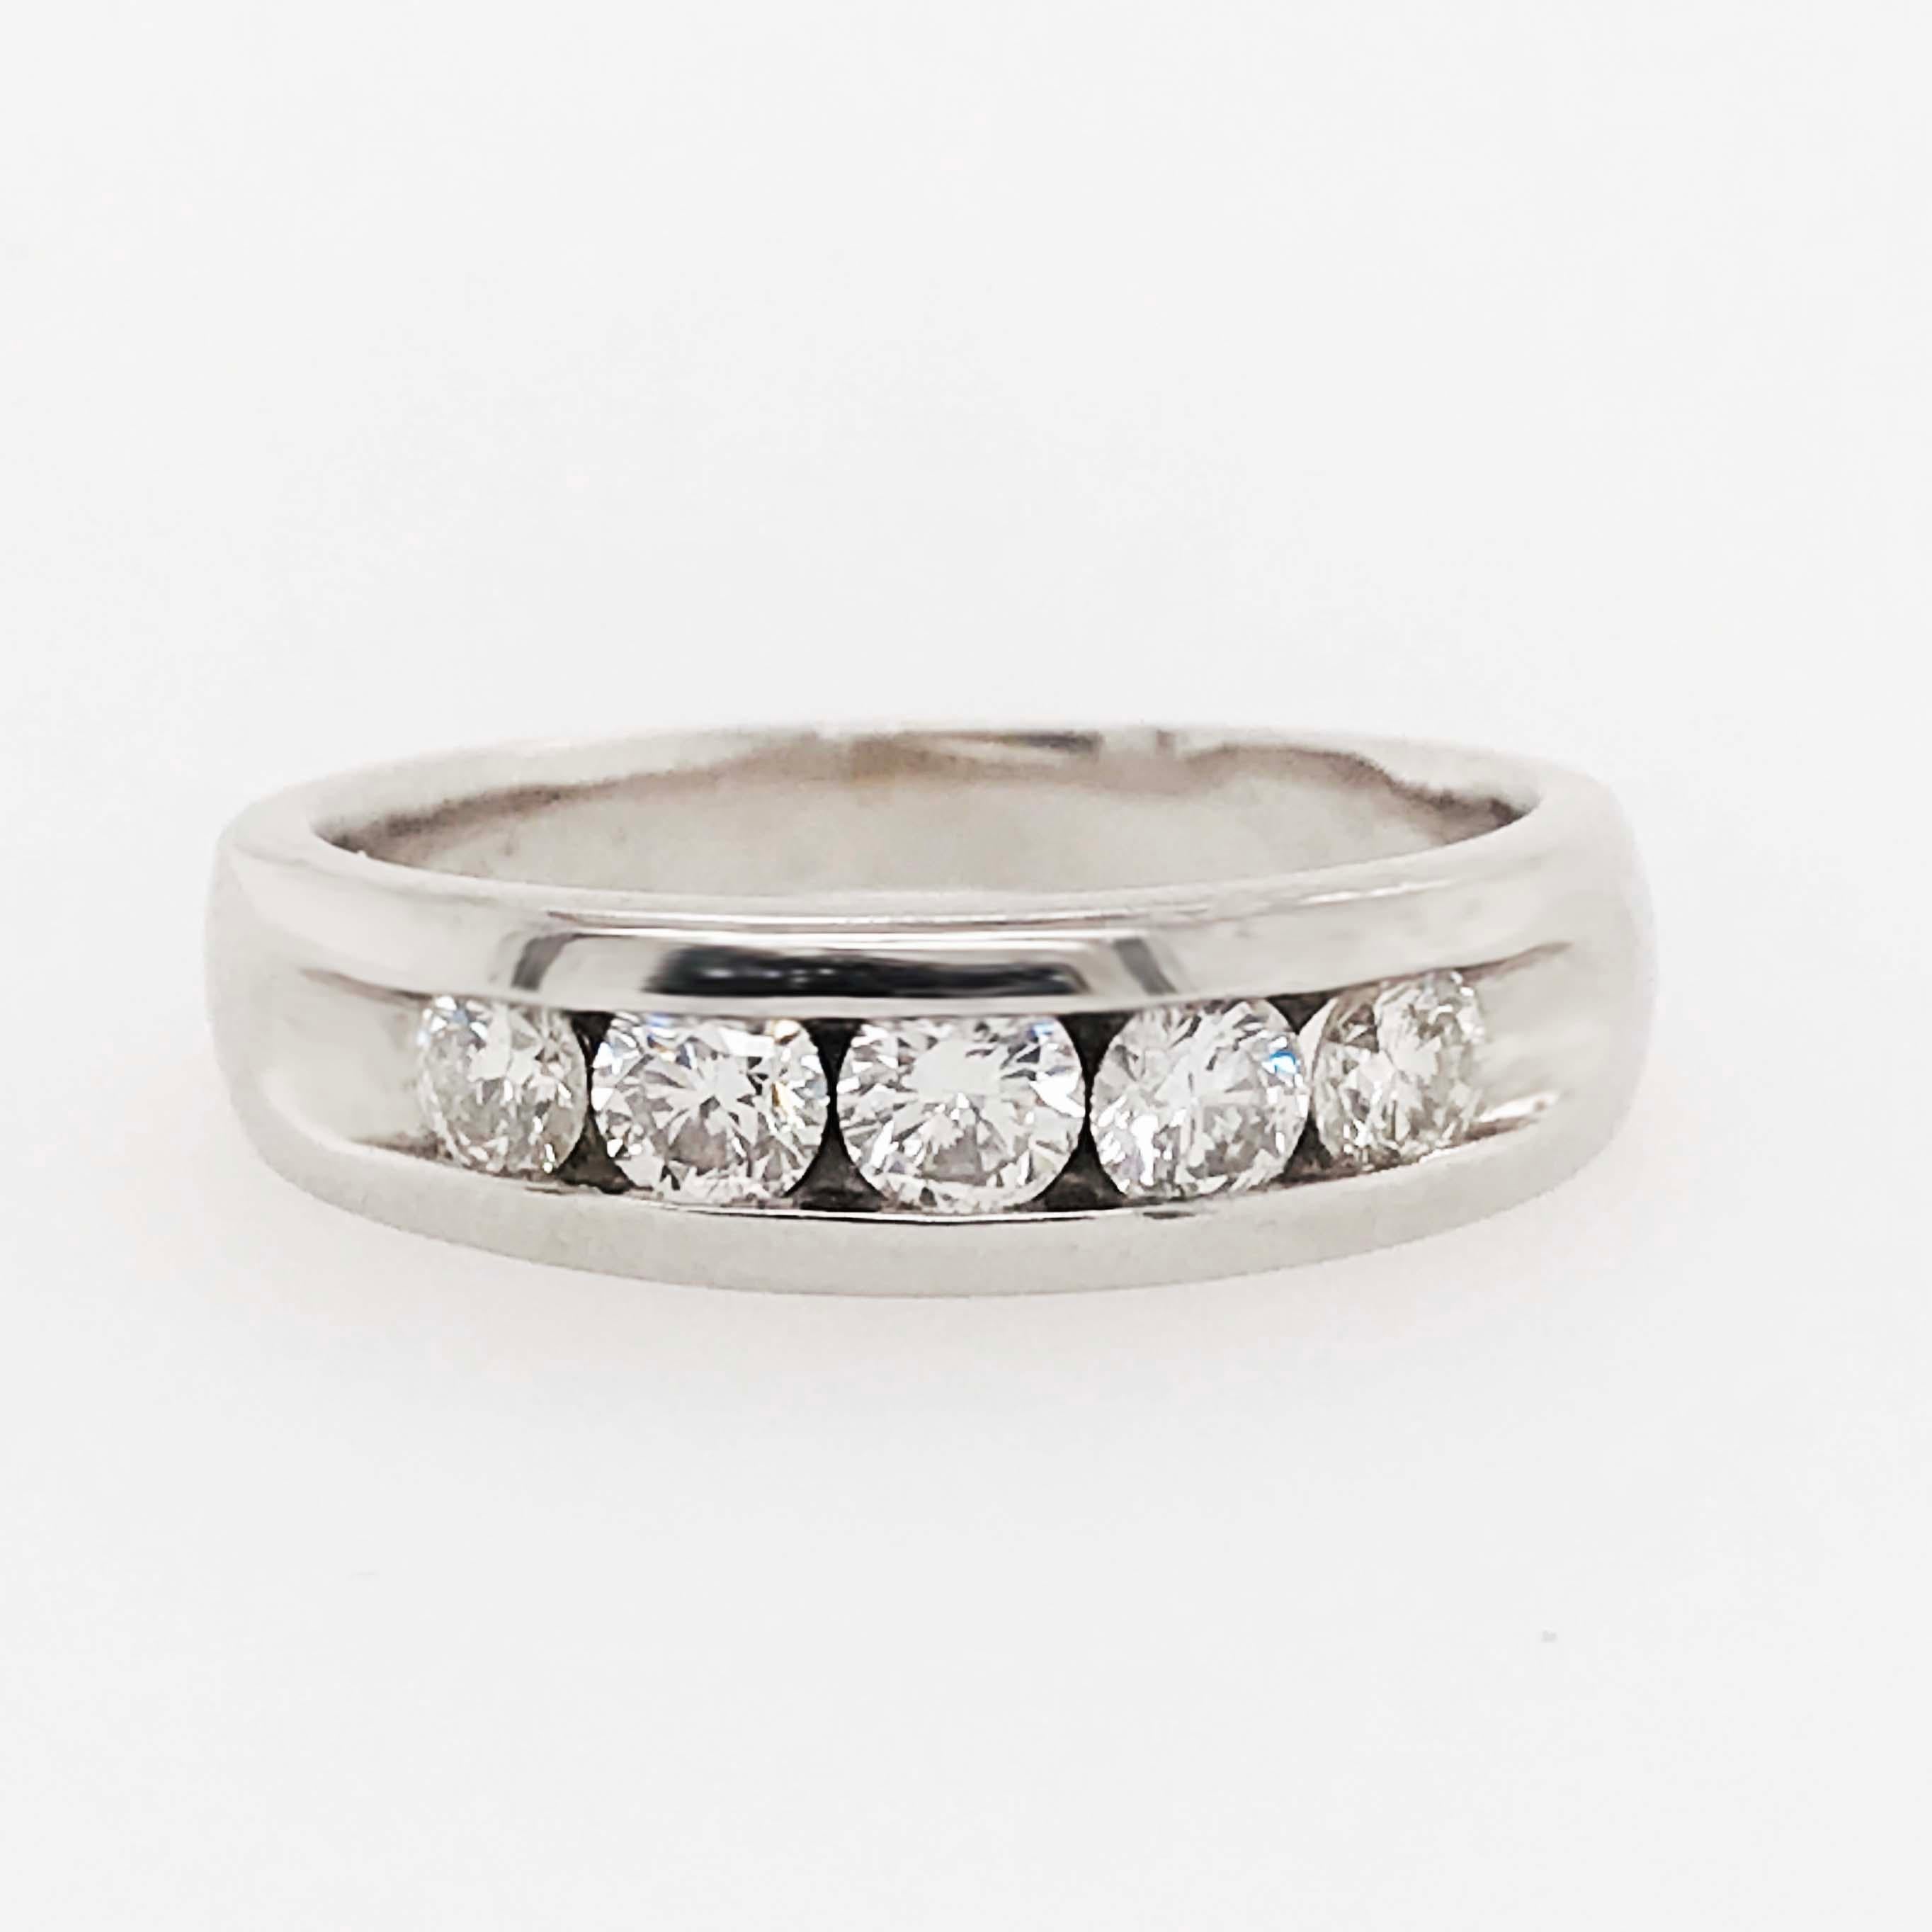 This diamond wedding band is classic and striking! With five round brilliant, natural diamonds set in a channel setting on the top of the ring. The men's diamond band is bold and timeless! The round brilliant diamonds are the perfect size to accents